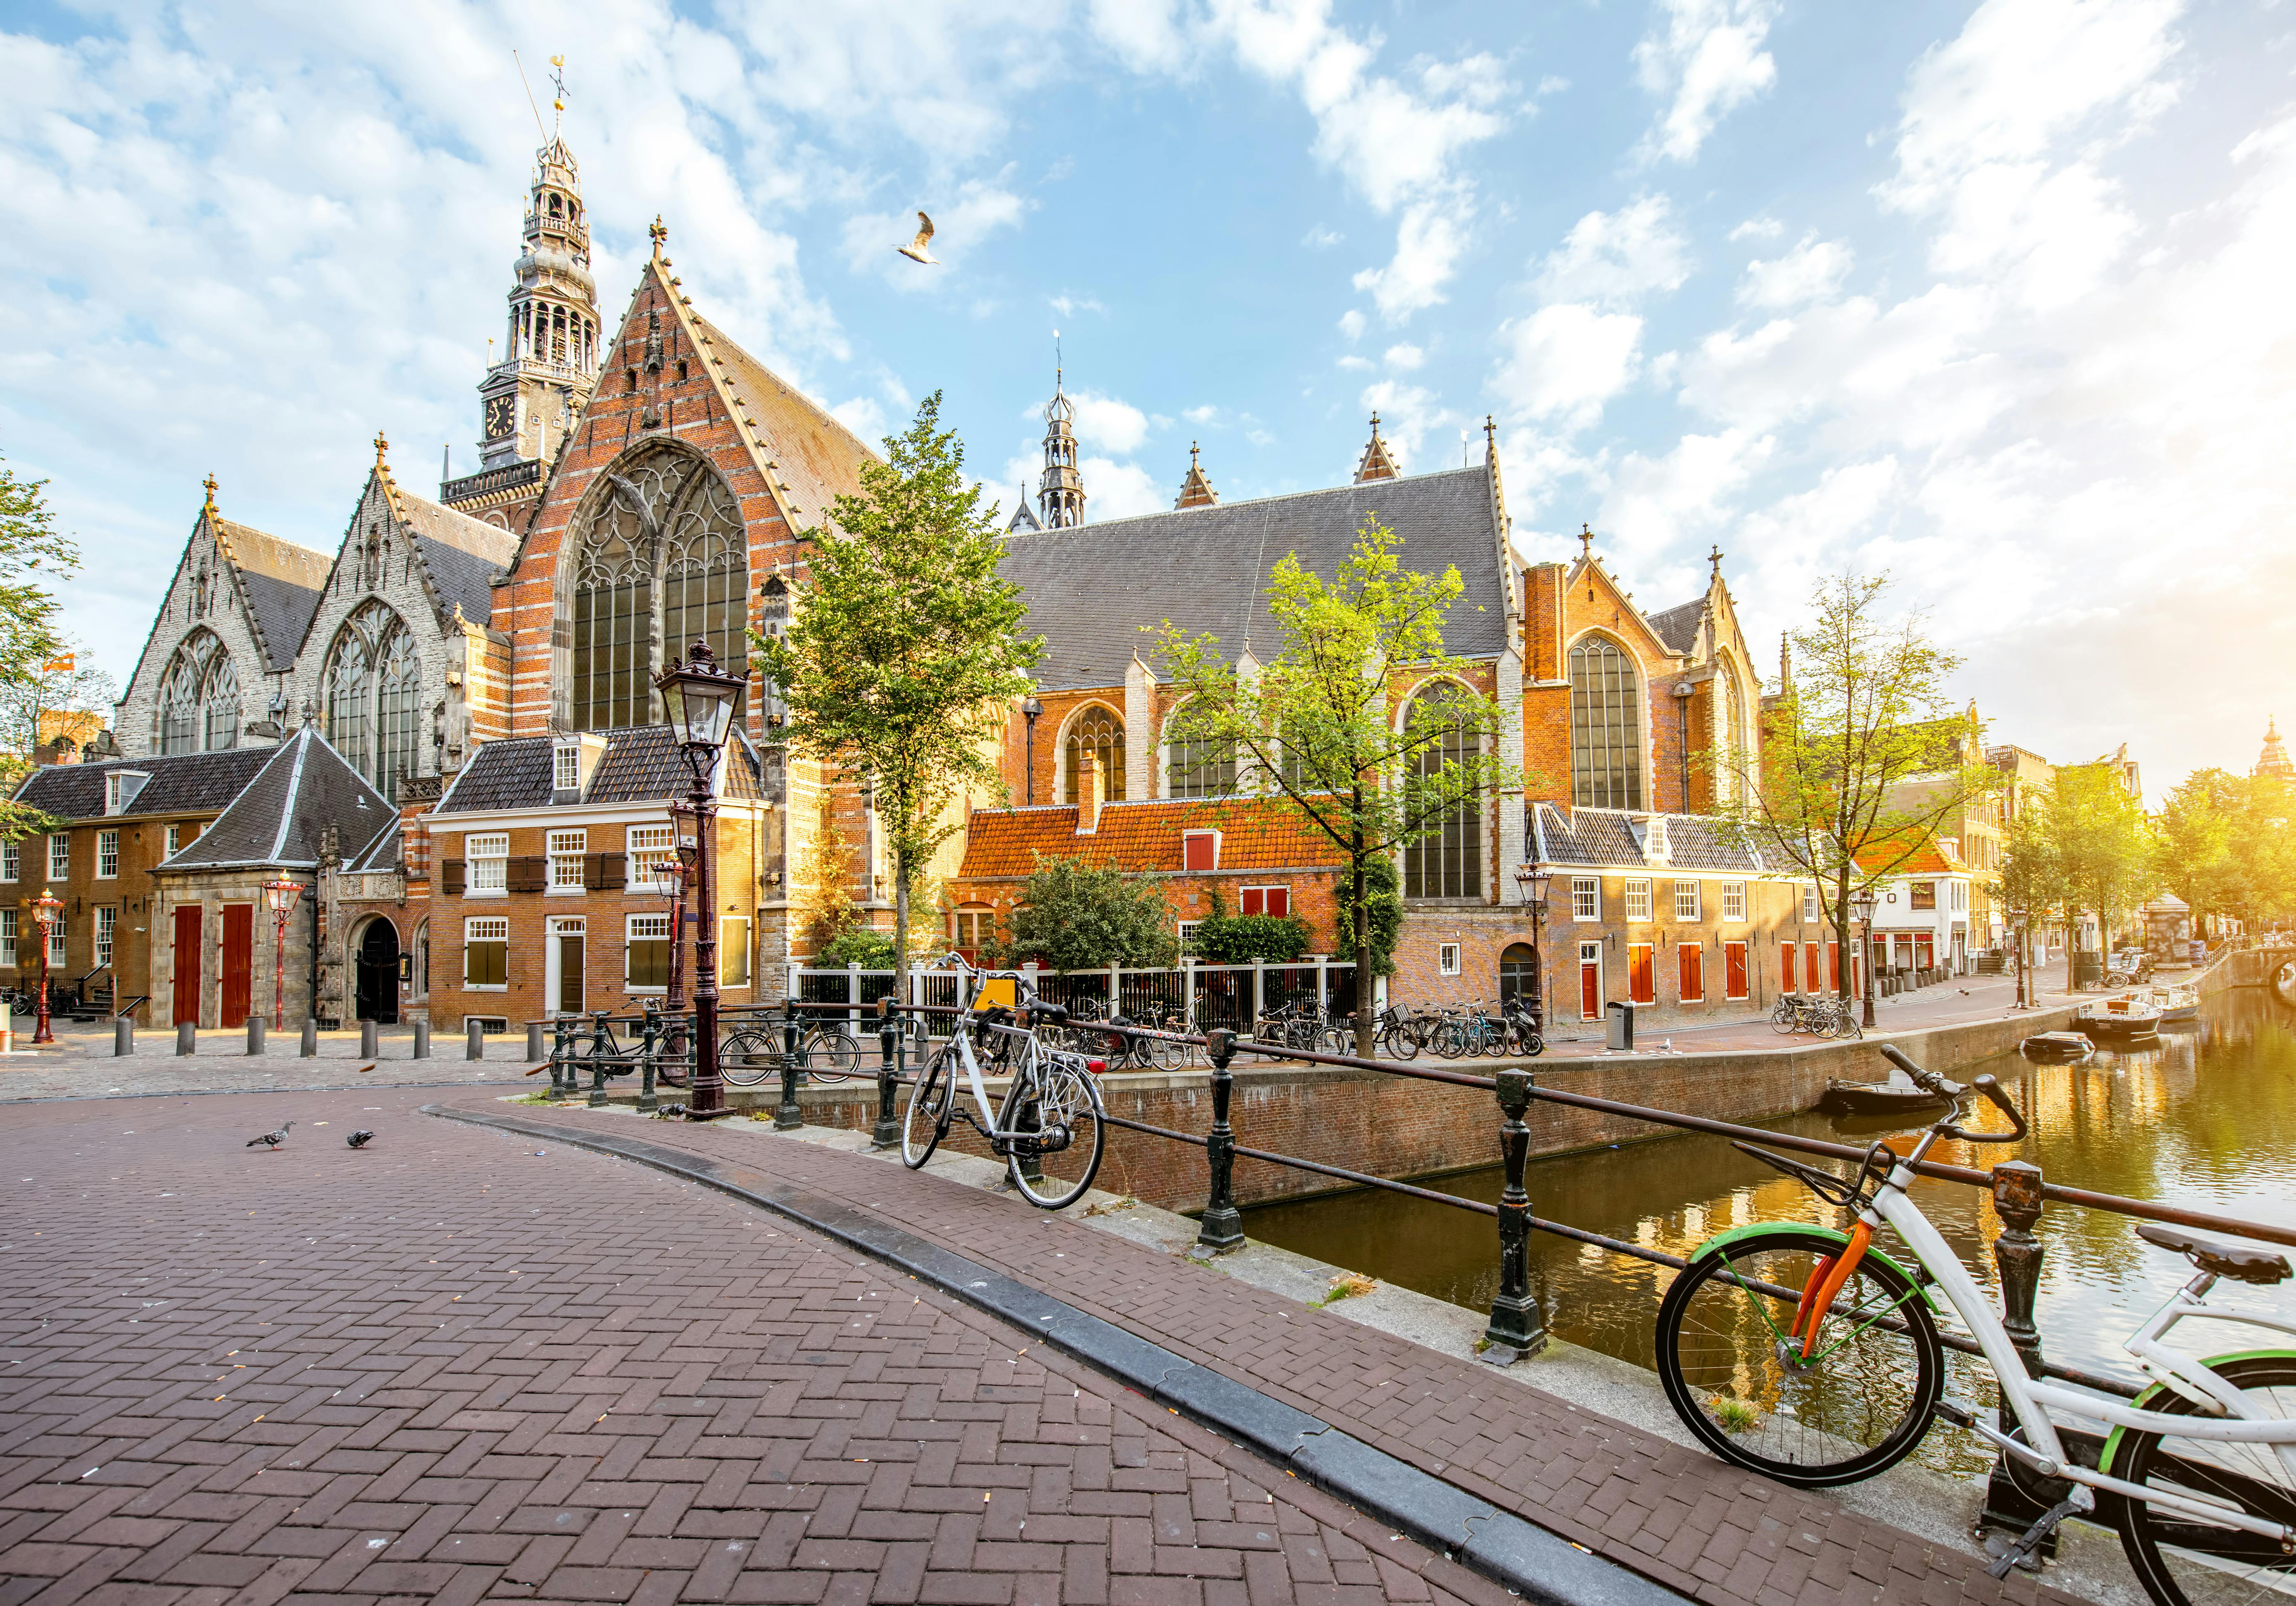 Self guided tour with interactive city game of Amsterdam